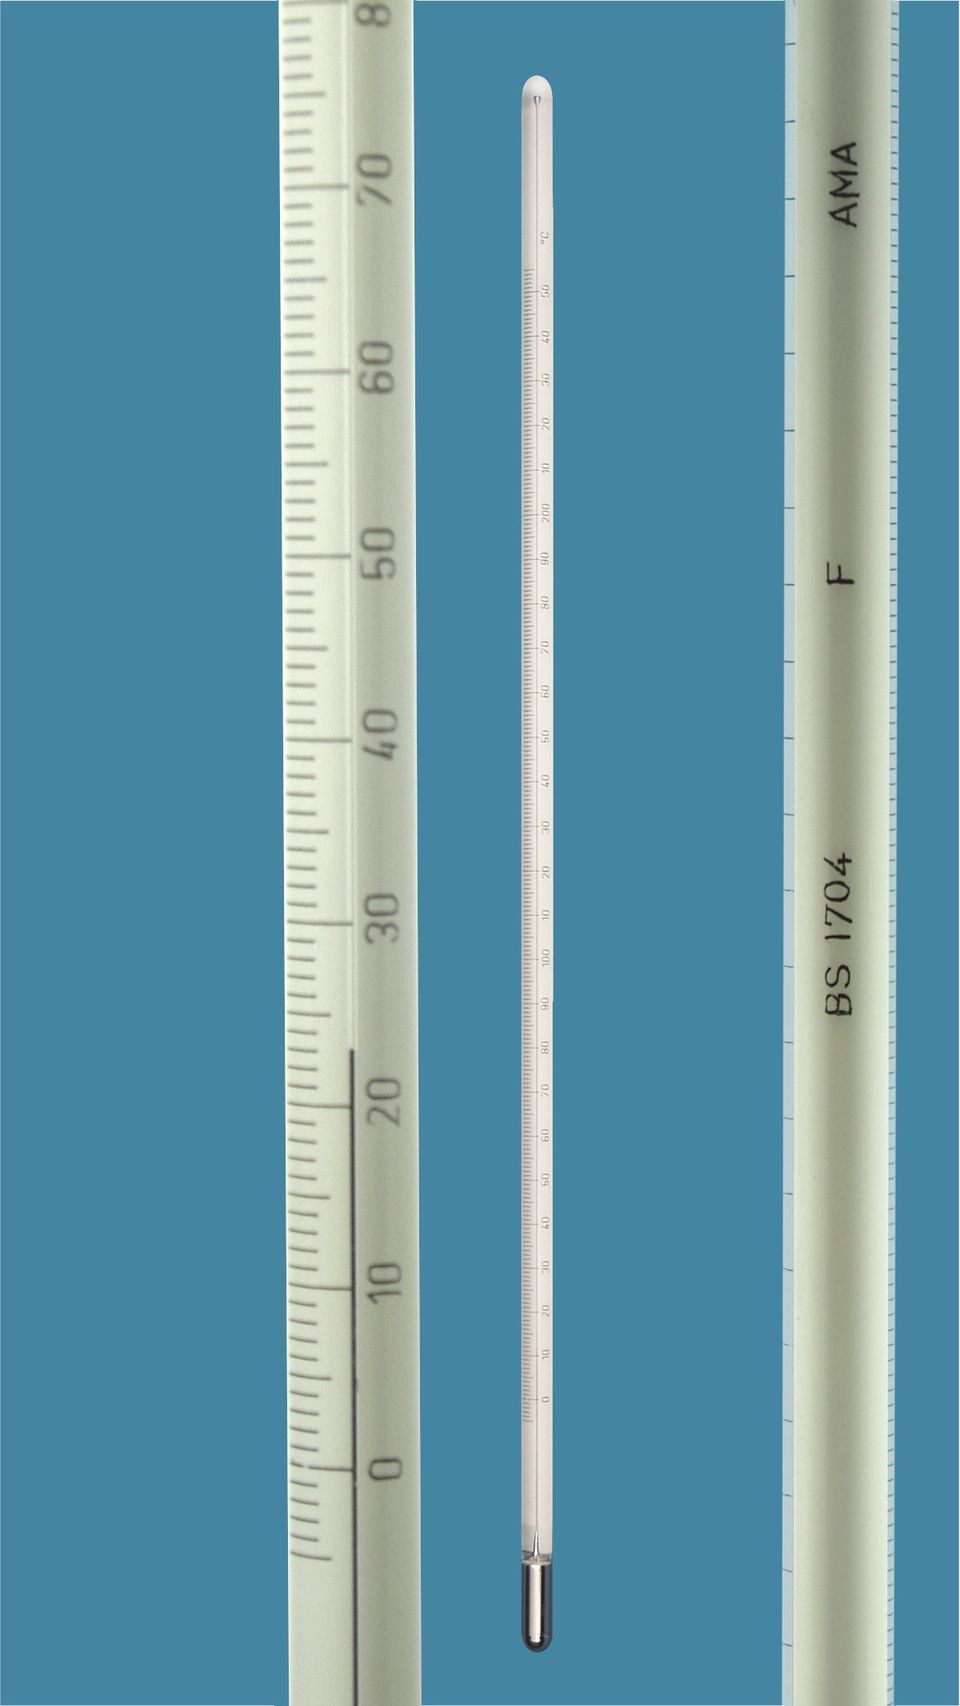 Thermometer ähnlich BS 1704, D/total, 0+100:1°C